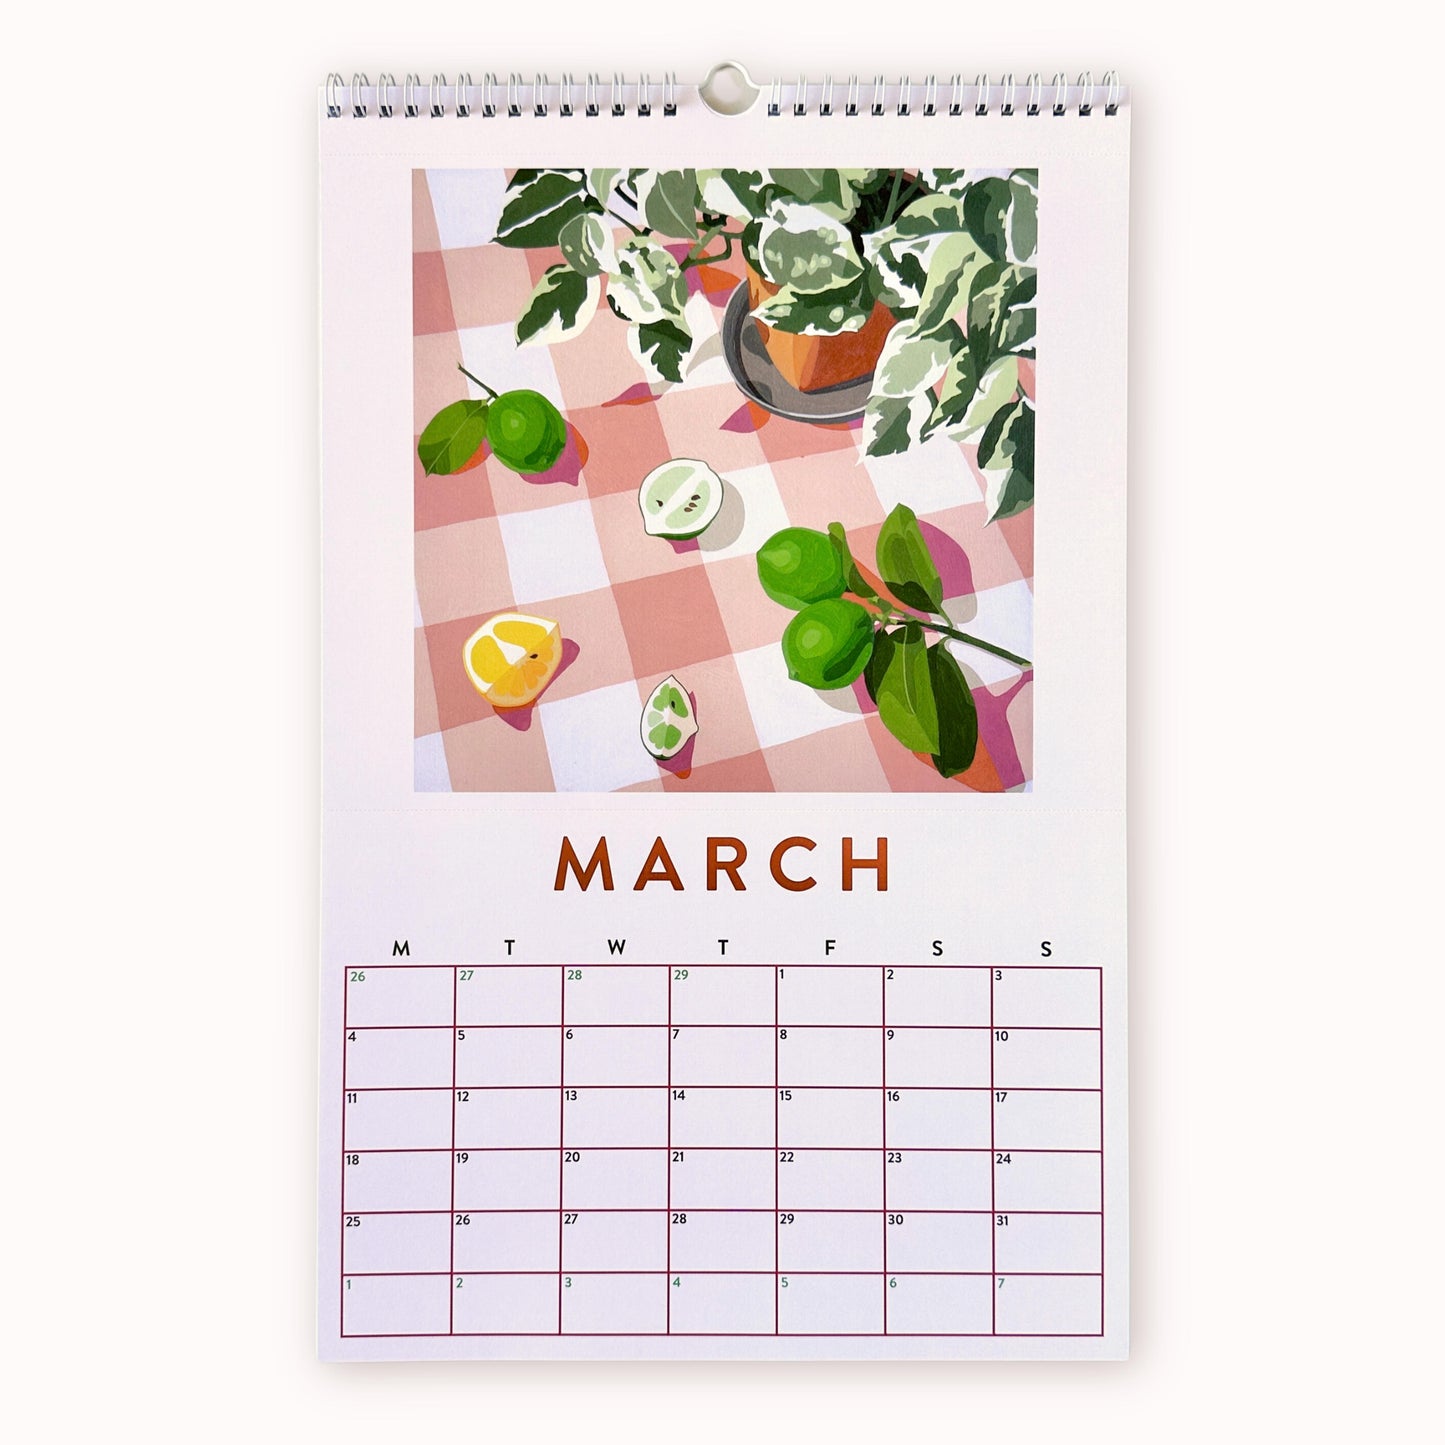 2024 art wall calendar in A3 size for the month of March, featuring a still life oil painting of fruits such as limes and lemon slices and a pot with plant leaves on a small plate, all on a soft creamy pink chequered background